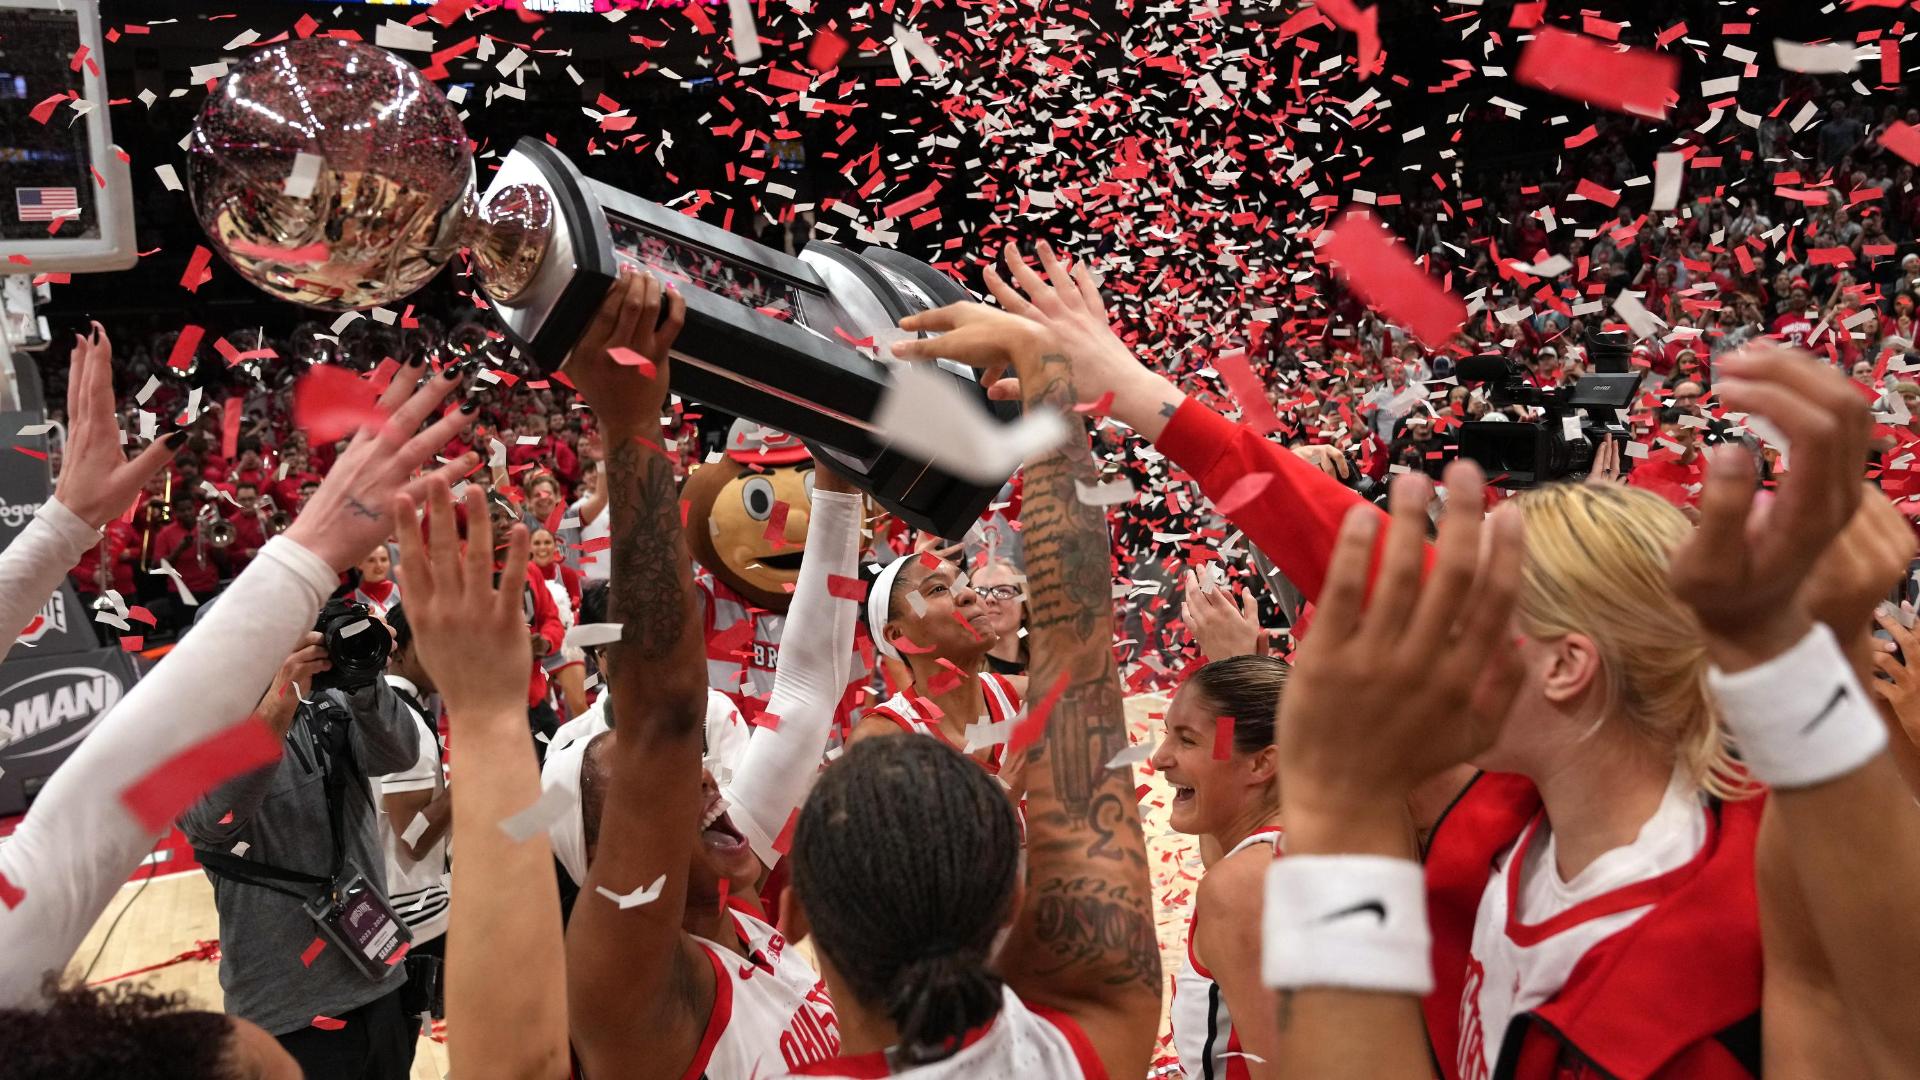 Ohio State celebrates after securing Big Ten title with win over Michigan